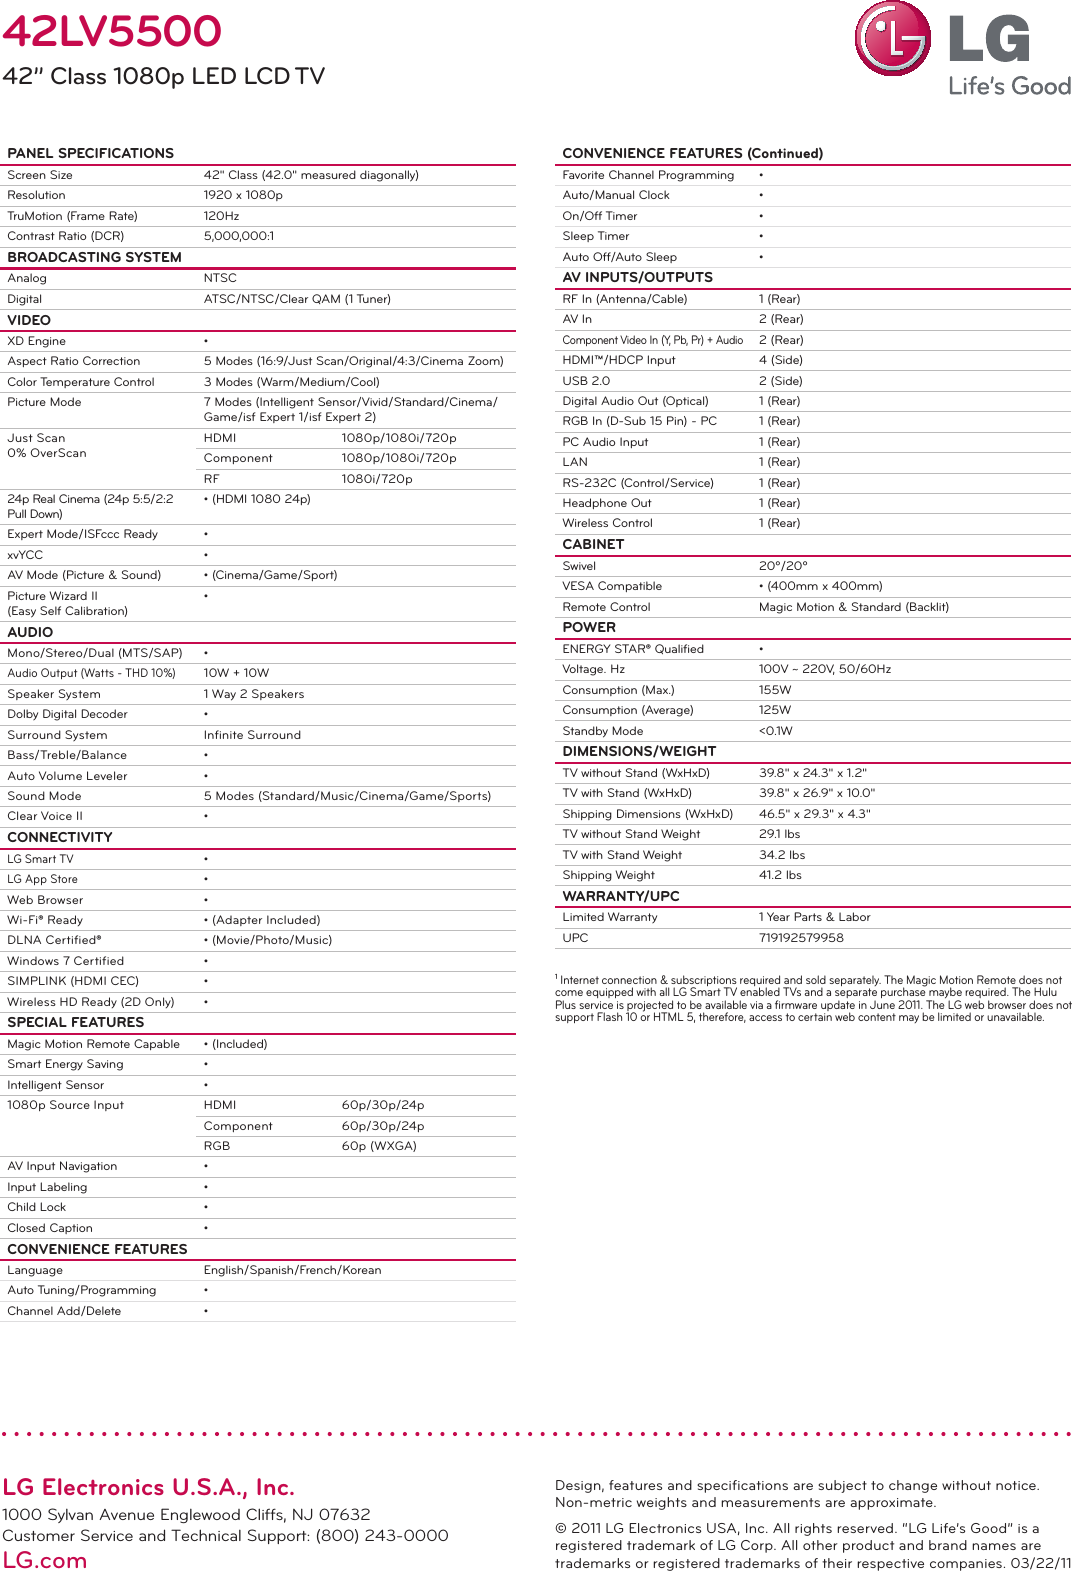 Page 2 of 2 - LG 42LV5500 User Manual Specification LED TV Spec